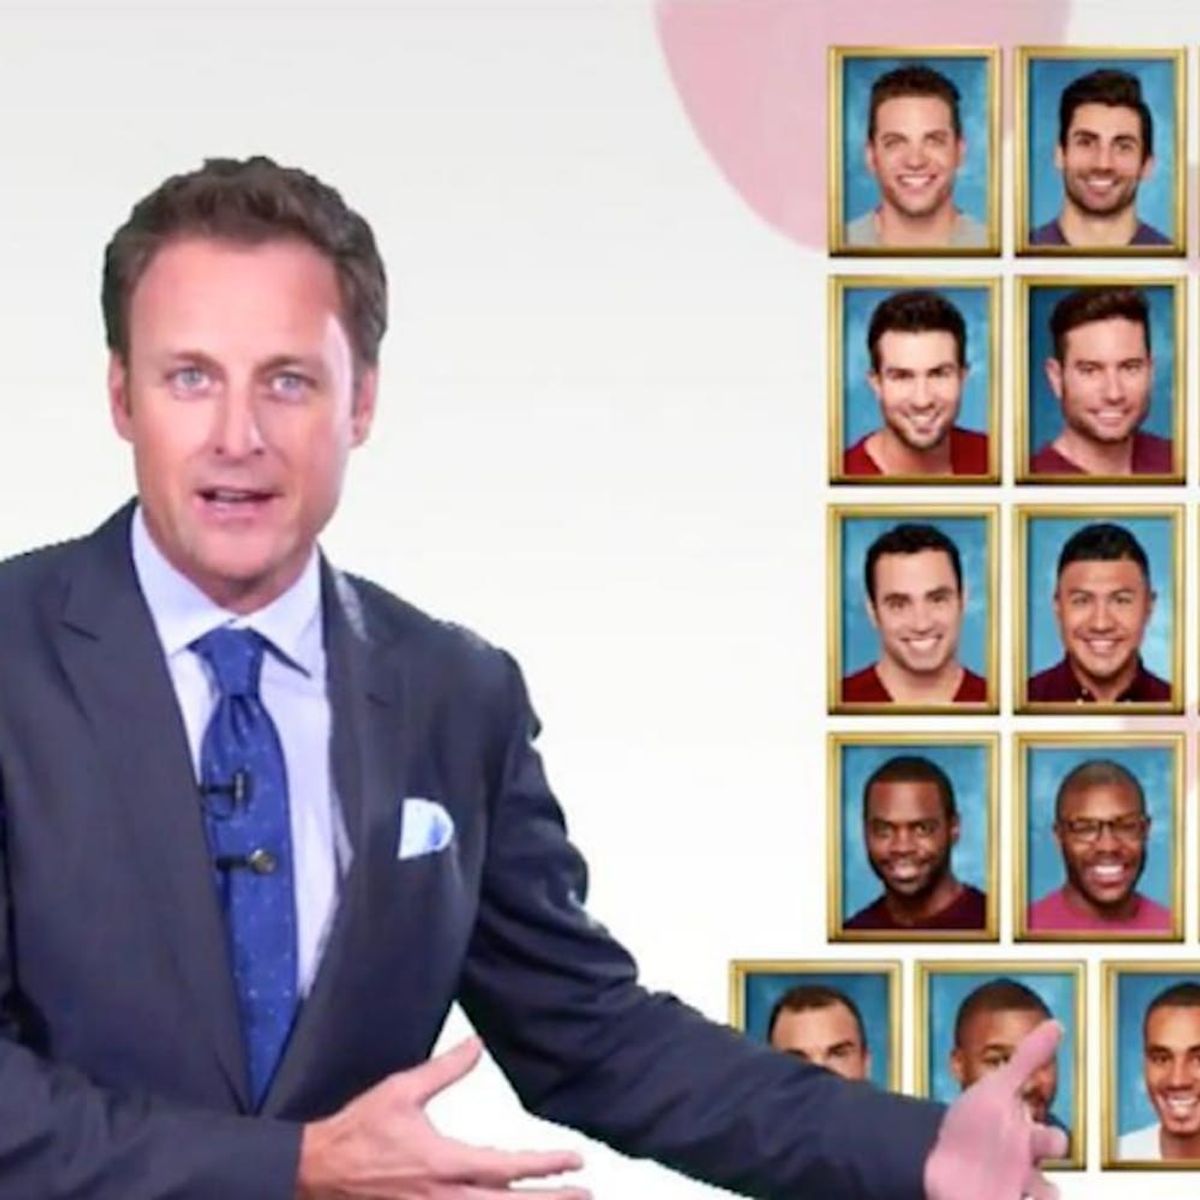 Morning Buzz! The New Bachelorette Contestants Are Here and They’re the Most Dramatic Ever + More